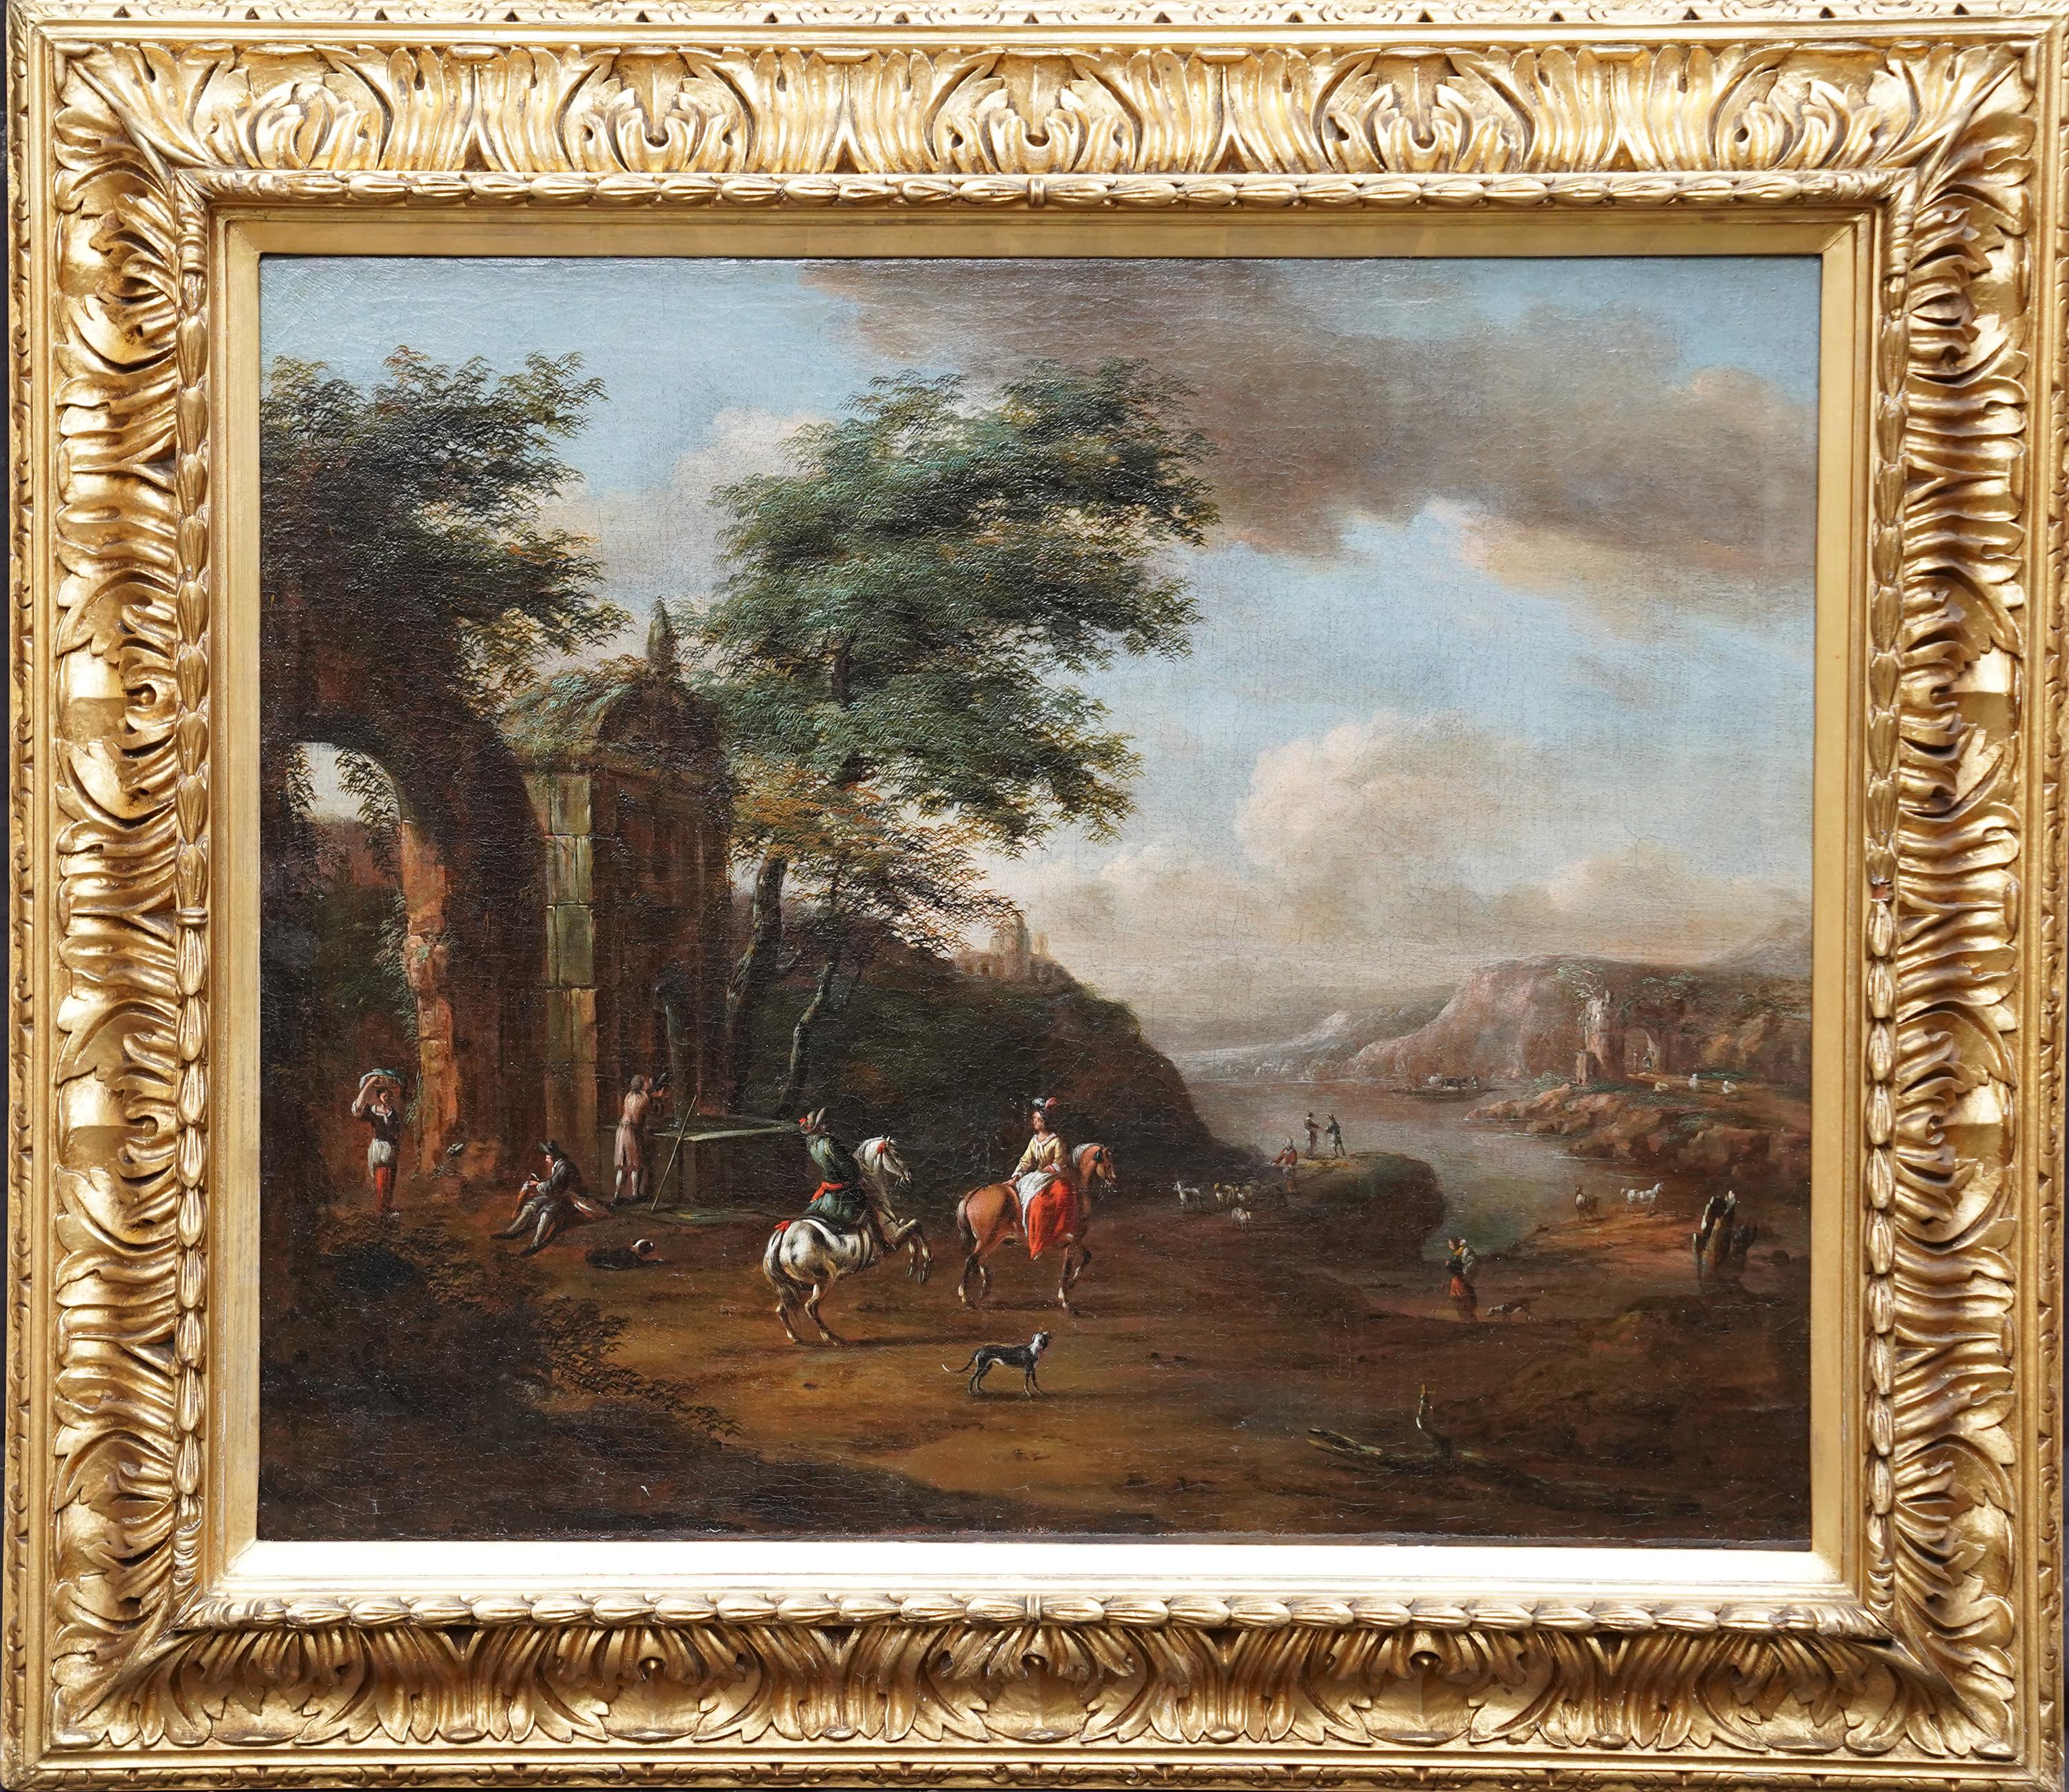 Pieter Wouwerman Landscape Painting - Travellers near Ruins in a Landscape - Dutch Old Master art figural oil painting